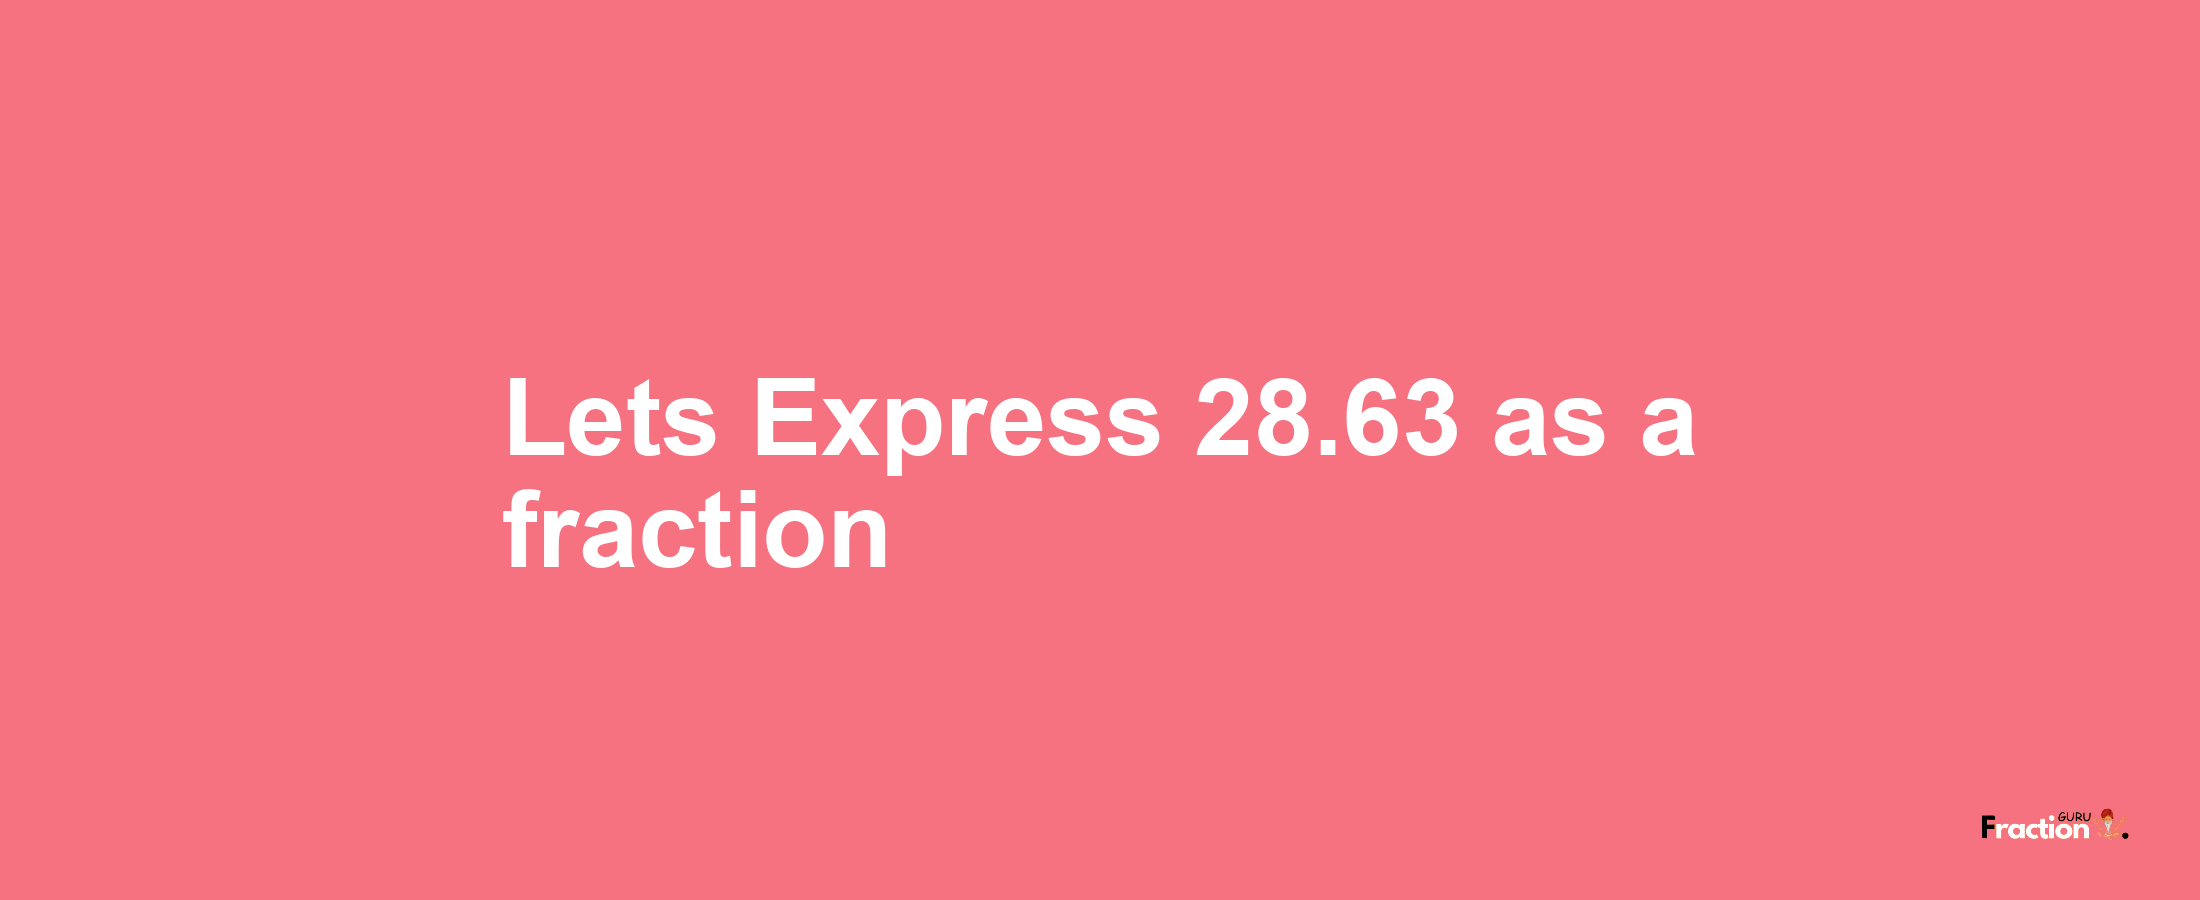 Lets Express 28.63 as afraction